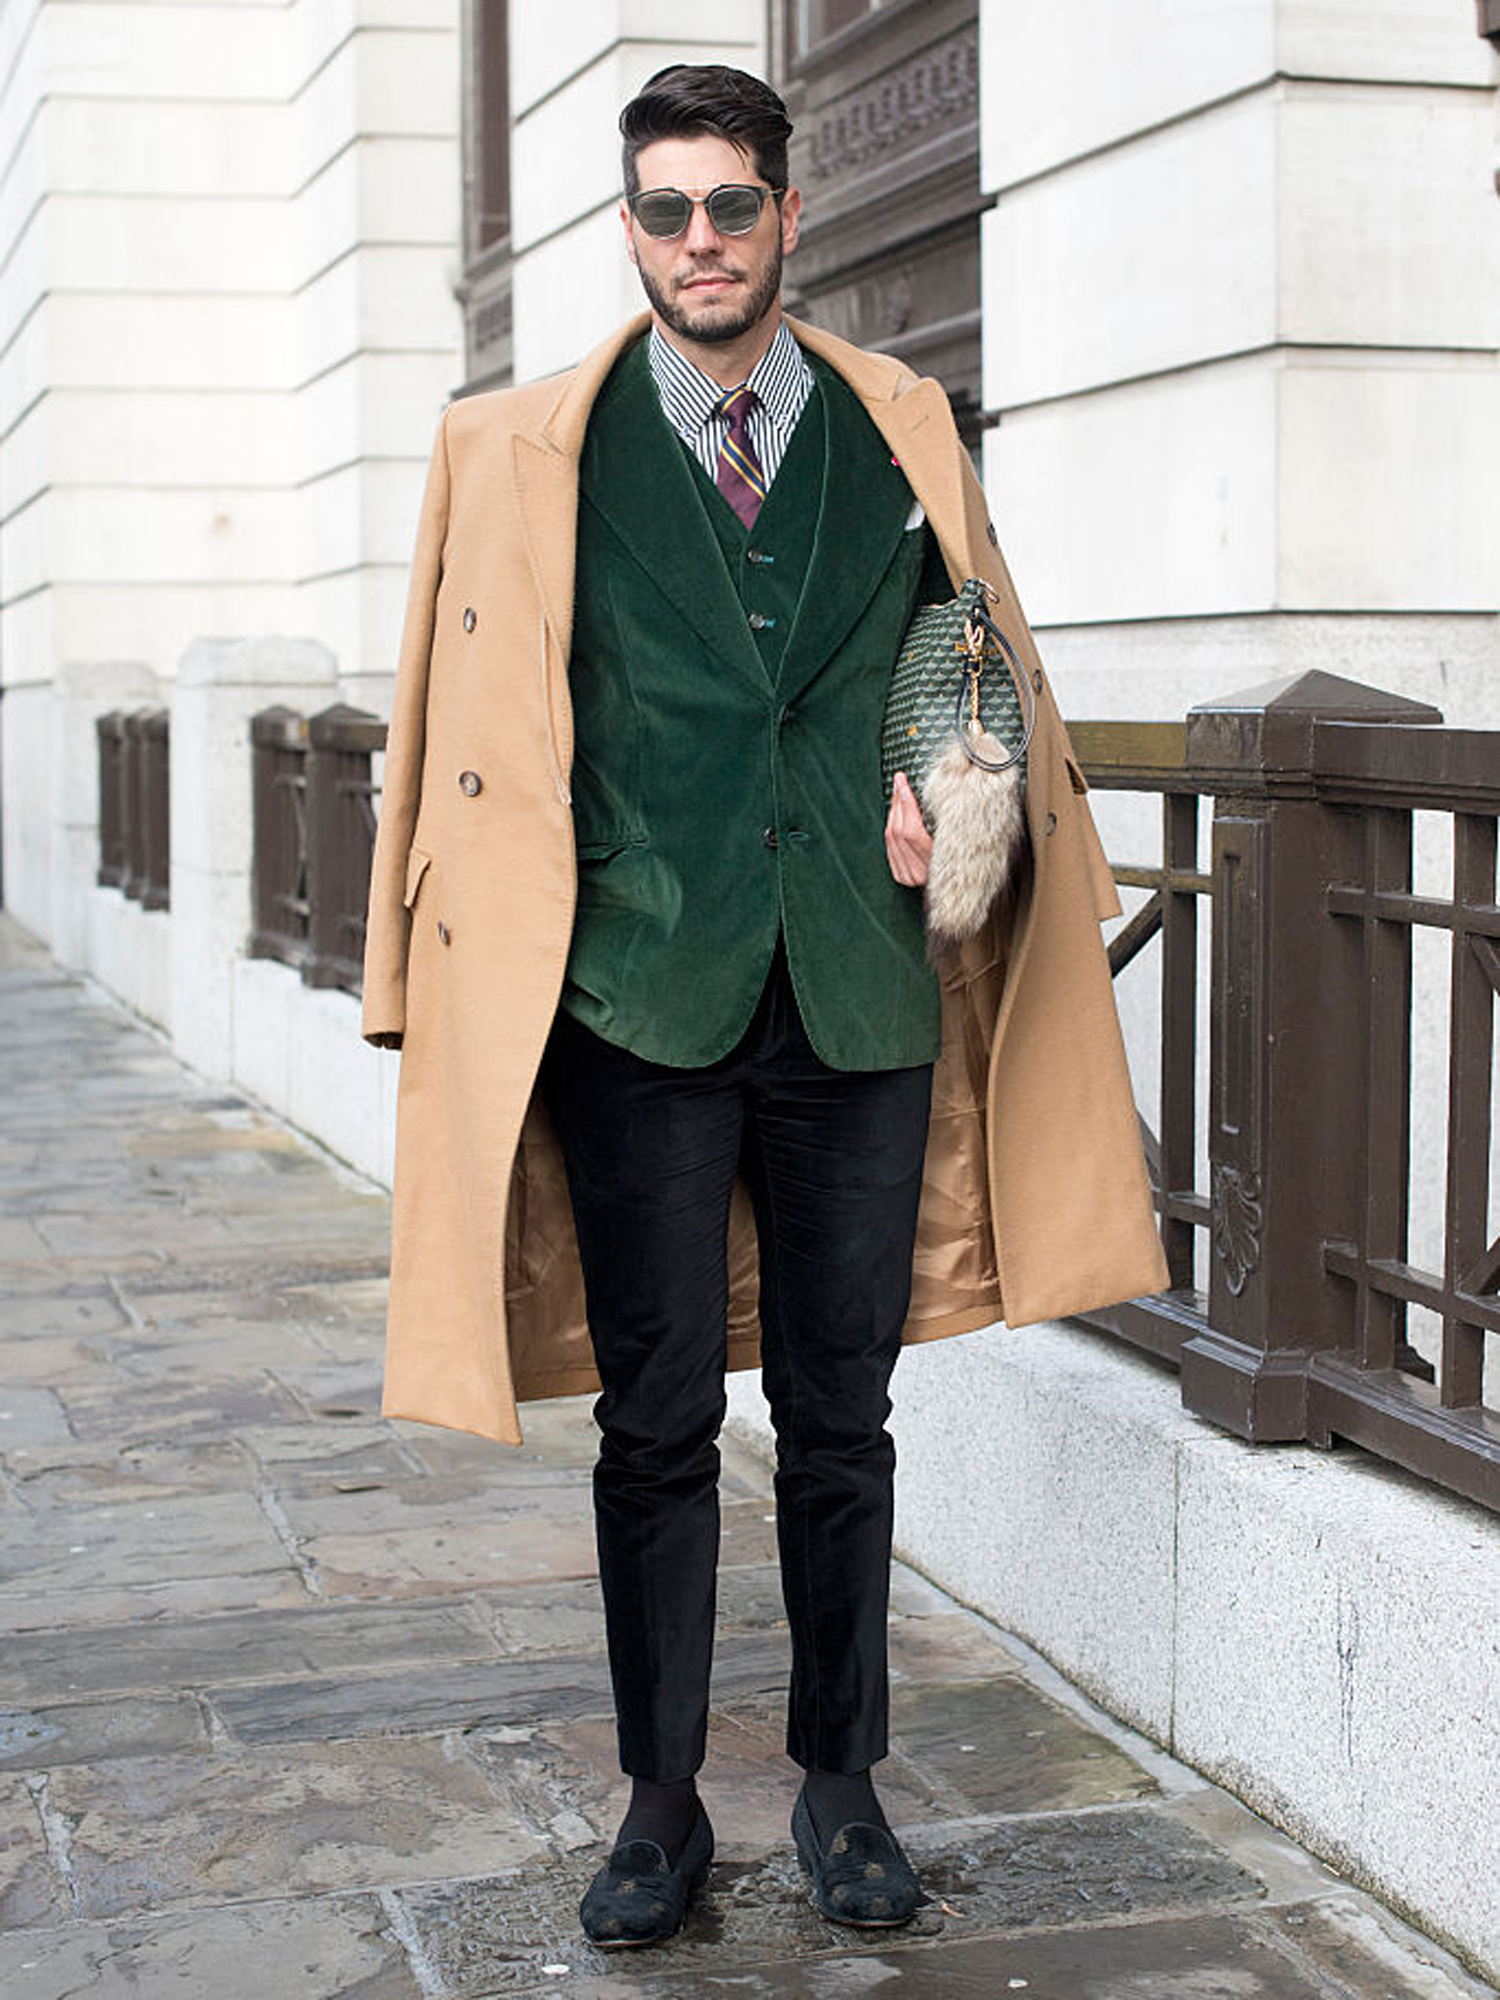 LONDON, ENGLAND - JANUARY 10: Fashion editor Kadu Dantas wearing a Margiella coat, Loja Vitor Alfaiate blazer and waistcoat, Zara trousers, Bluebird shoes, Fauve le Page clutch bag and Dior sunglasses on day 2 of London Collections: Men on January 10, 2015 in London, England. (Photo by Kirstin Sinclair/Getty Images)